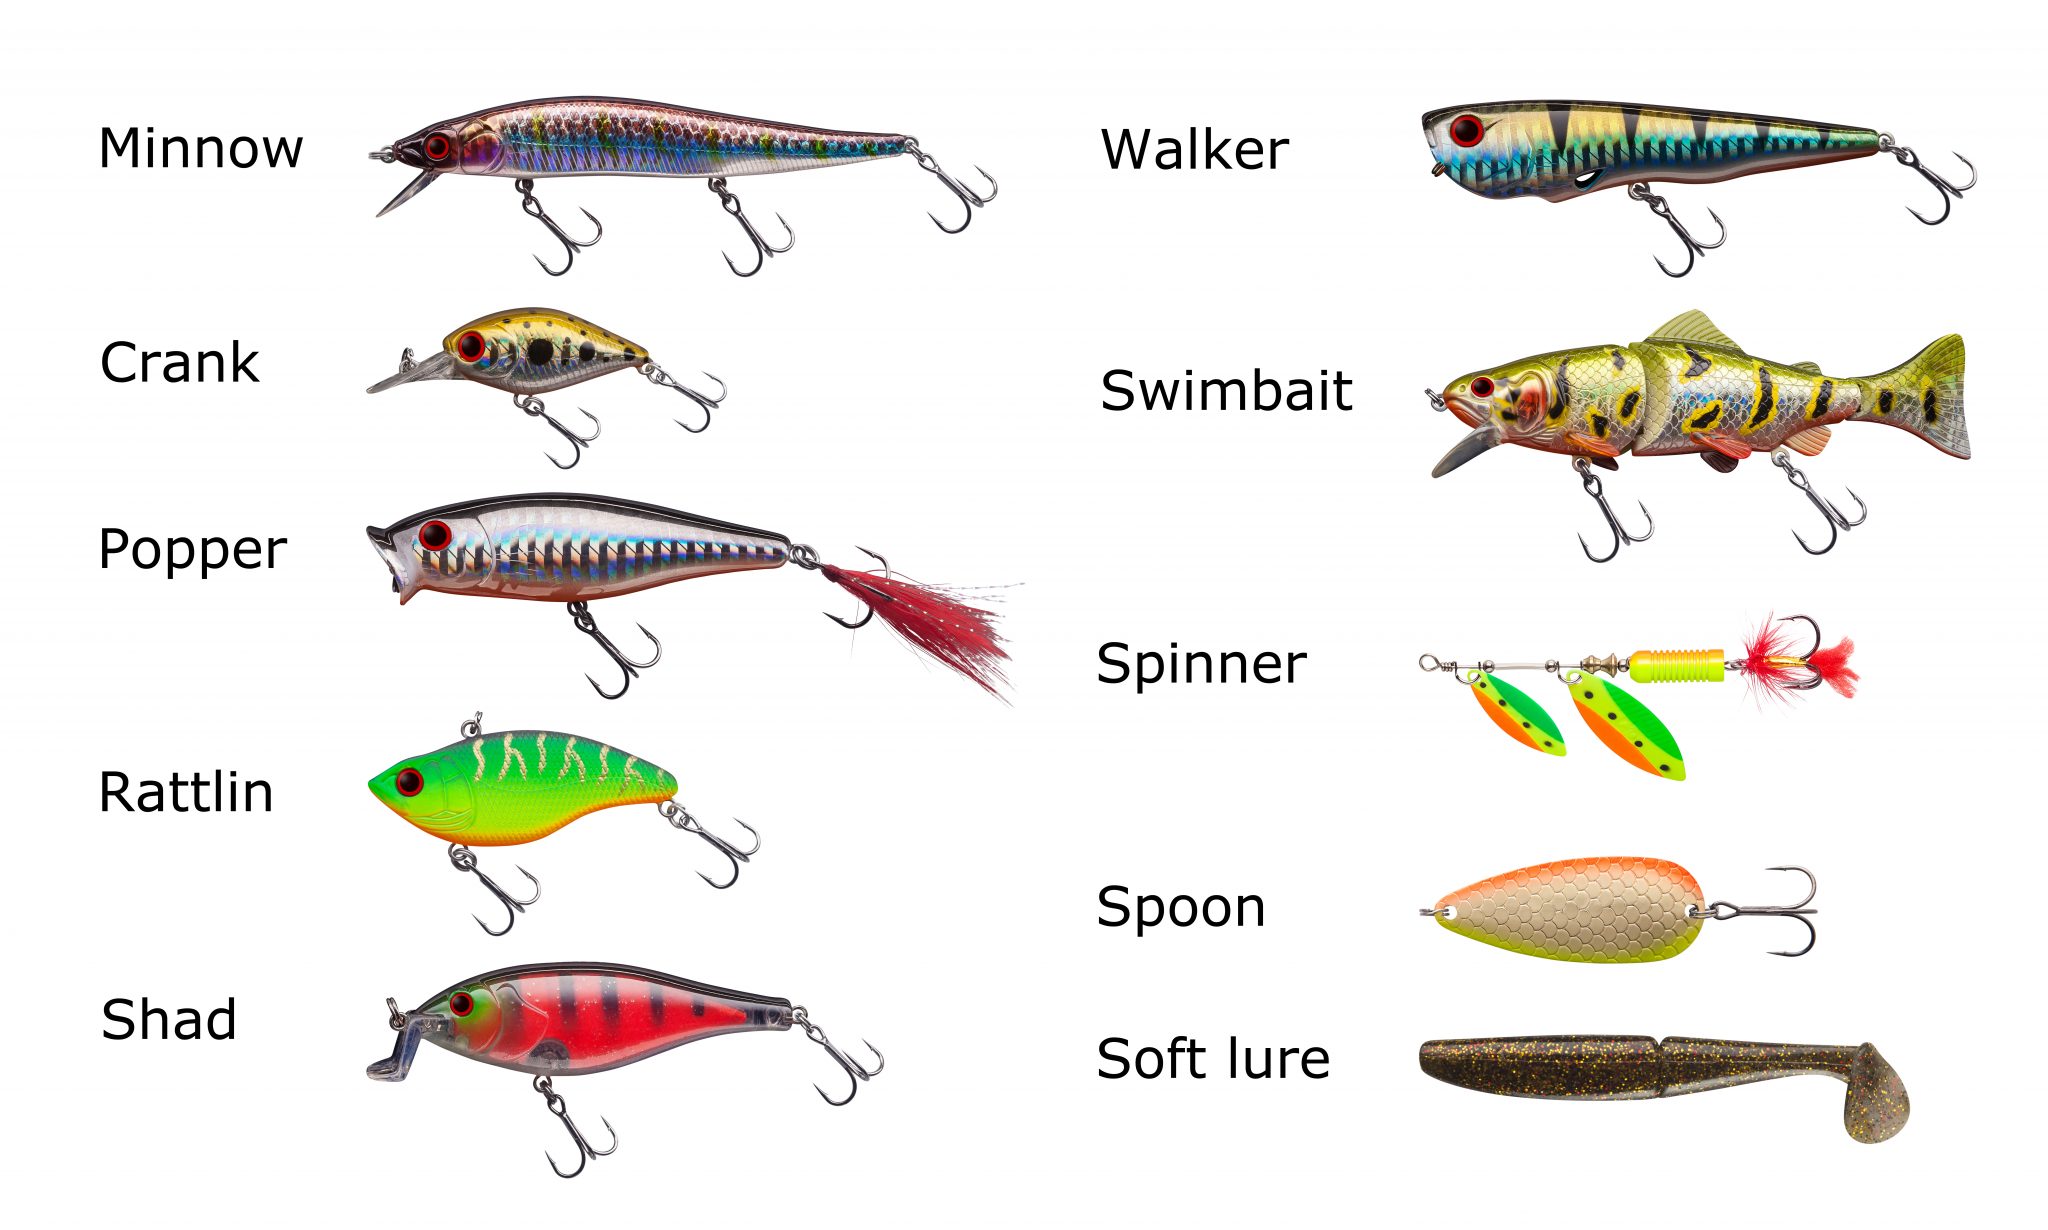 Paddle Tail Swimbaits For Bass And Other Species